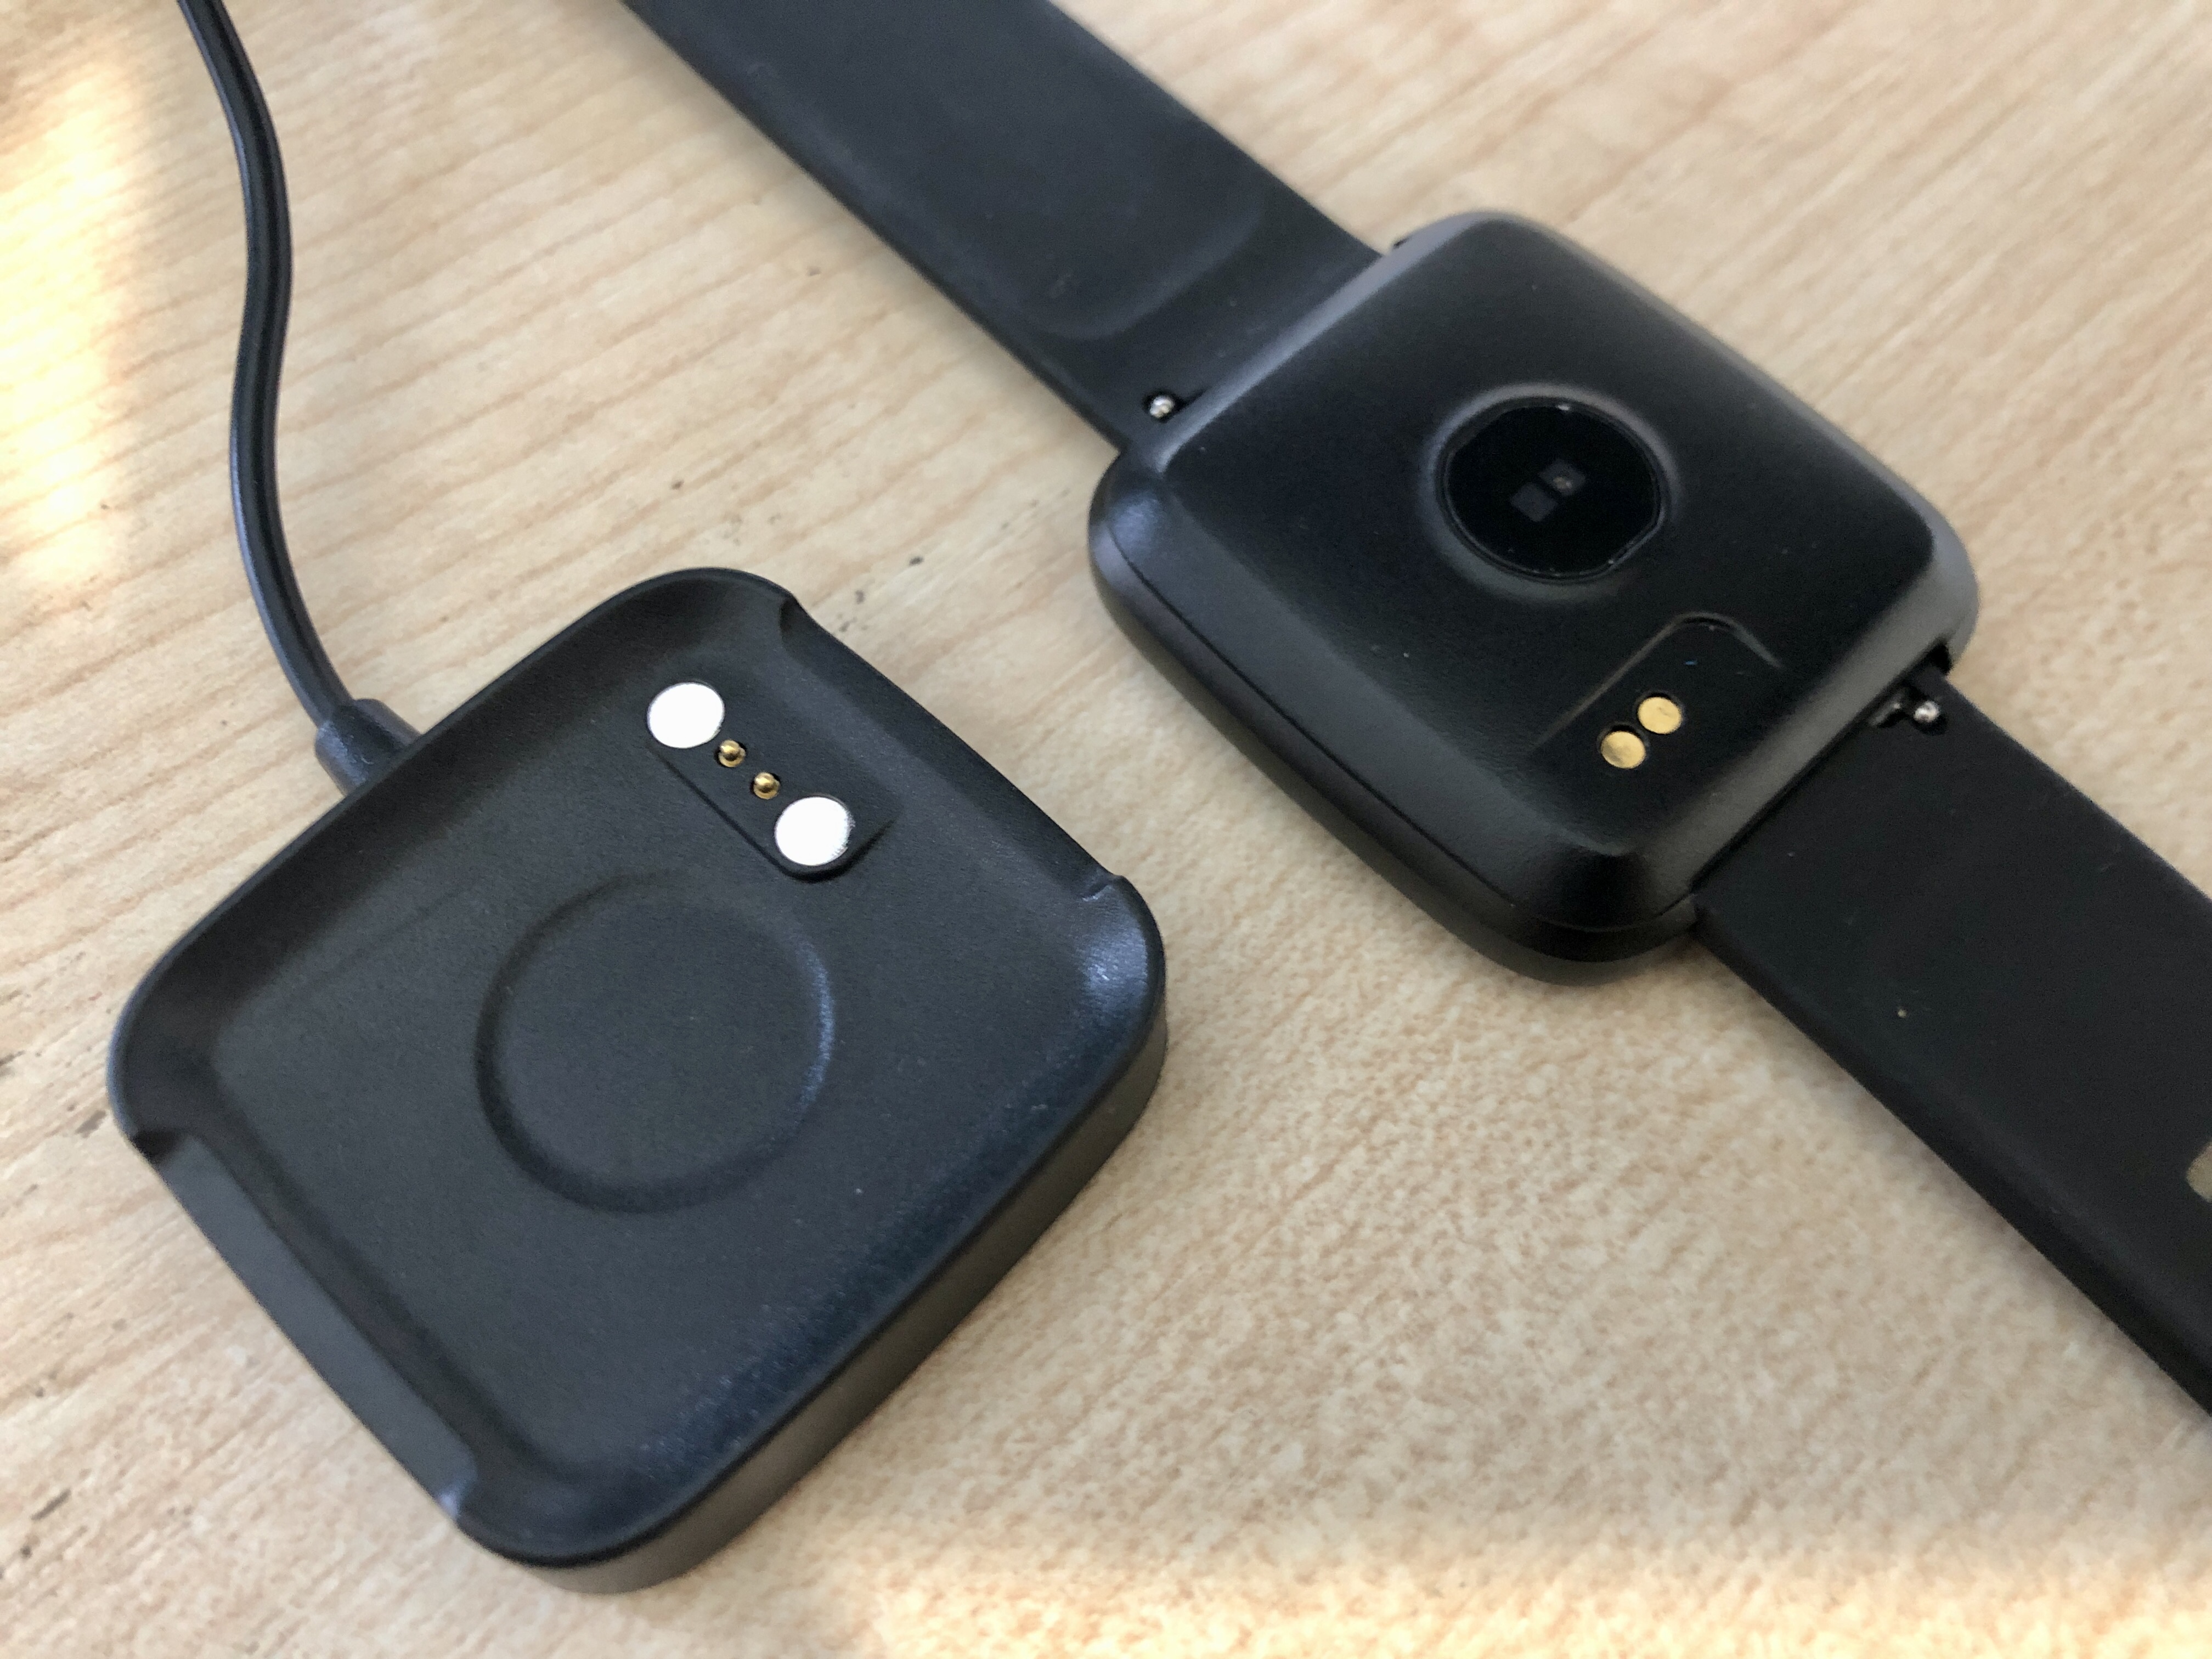 Photo of PineTime watch next to the small black square charging pad, on a wooden desk